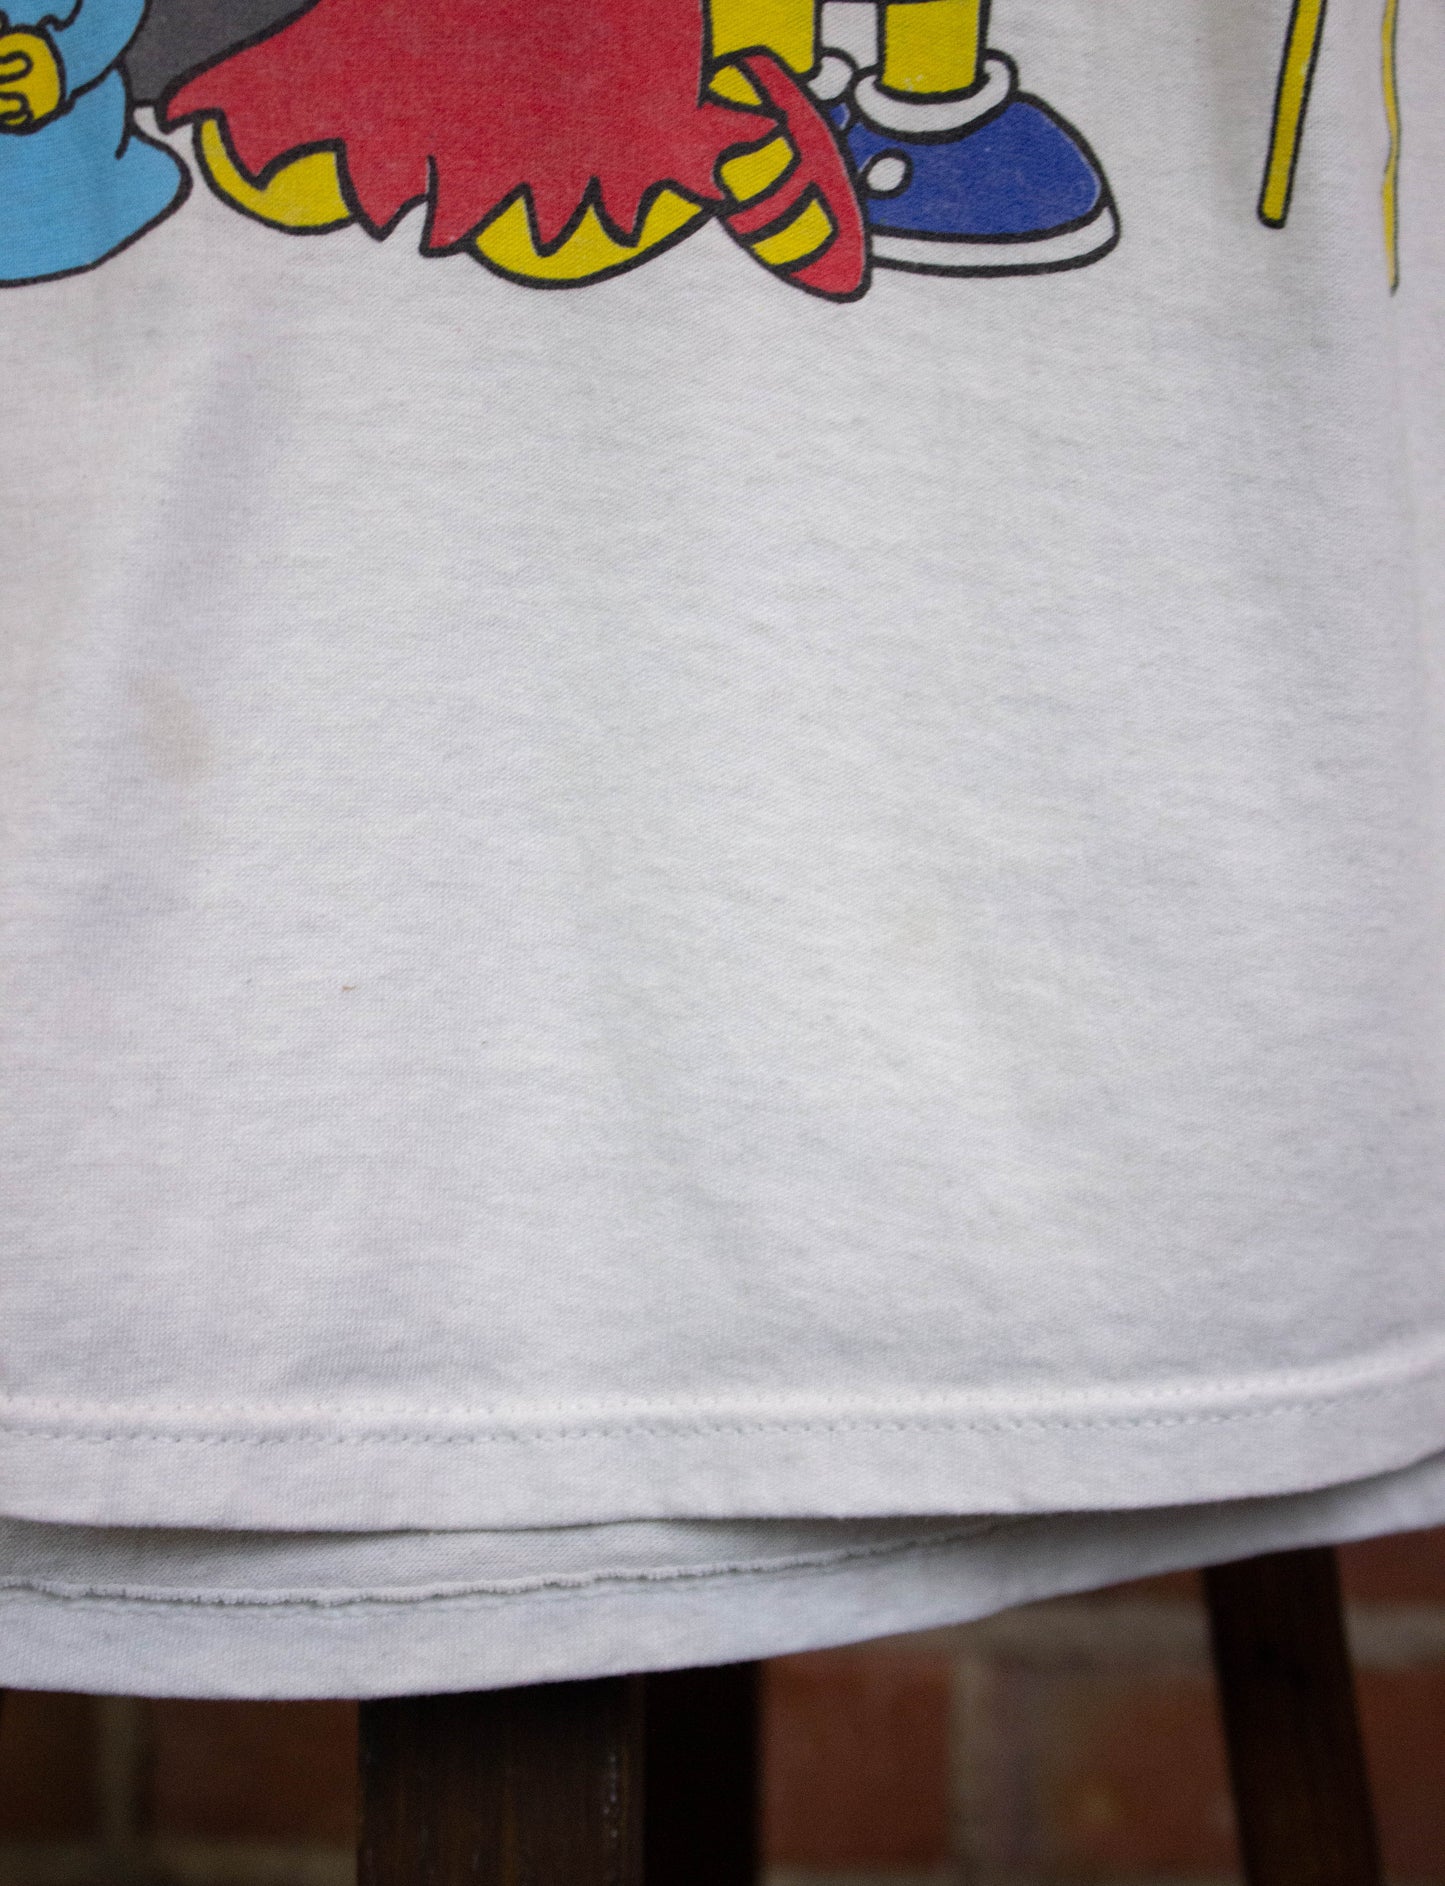 Vintage Simpsons 1989 Say Cheese Graphic T Shirt White Large